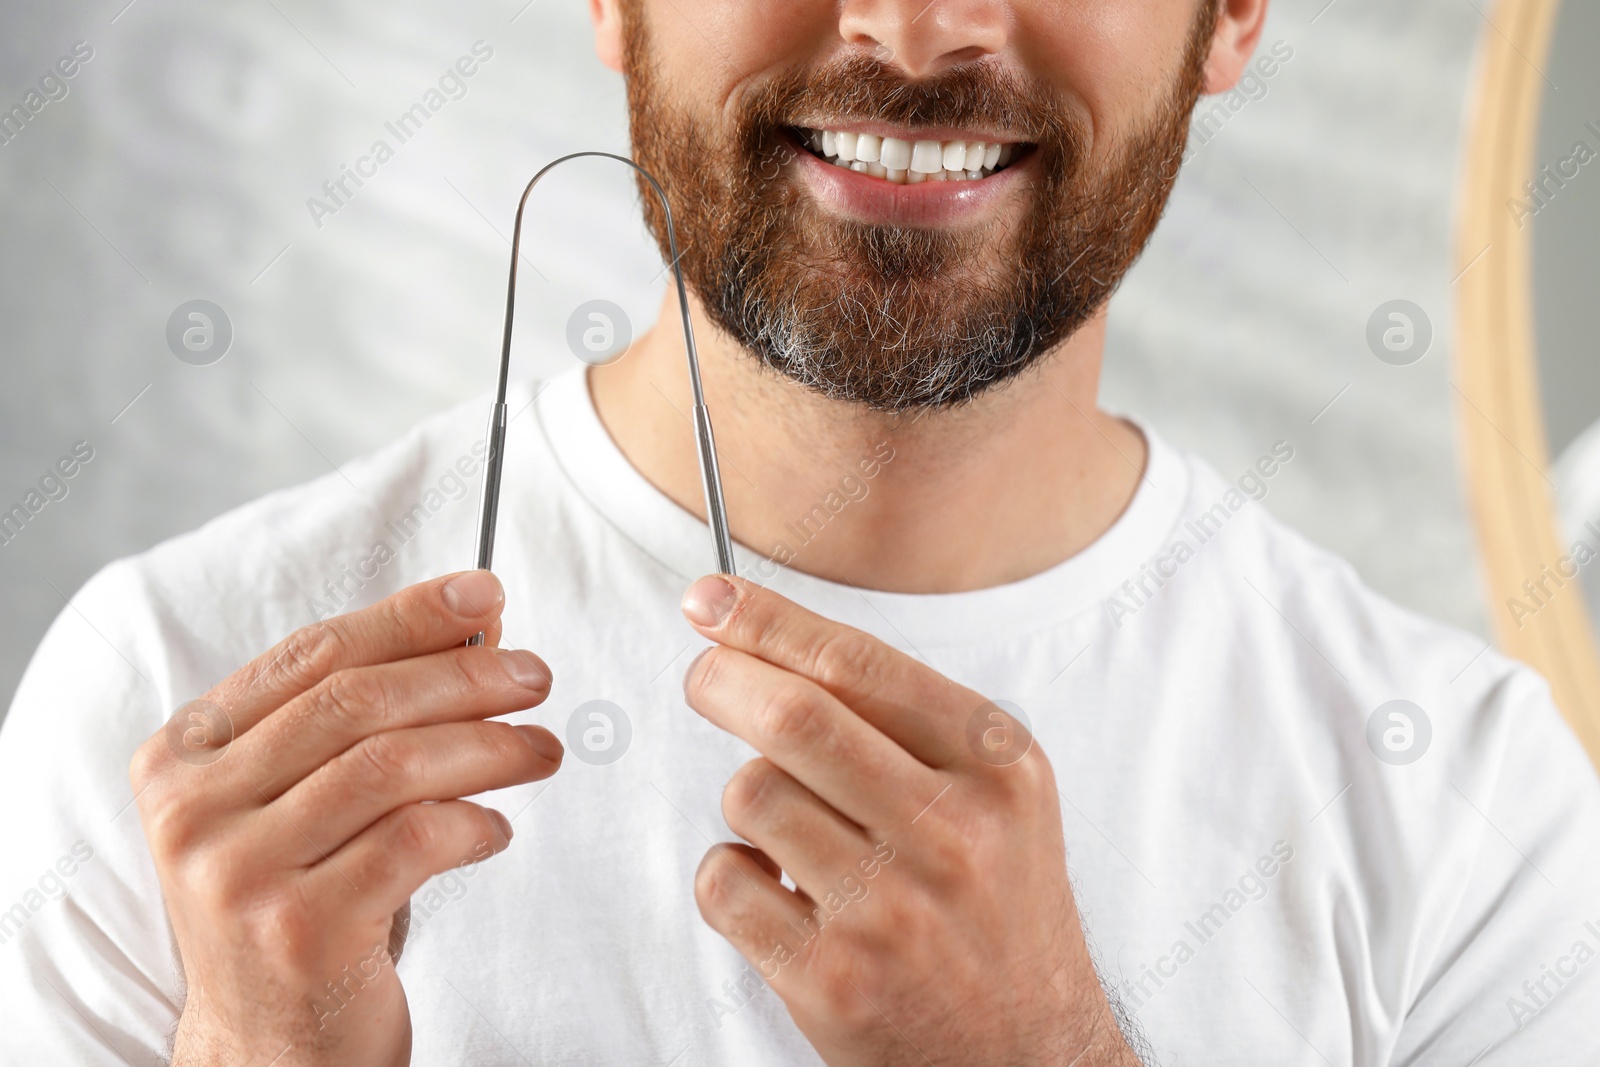 Photo of Man with tongue cleaner on blurred background, closeup